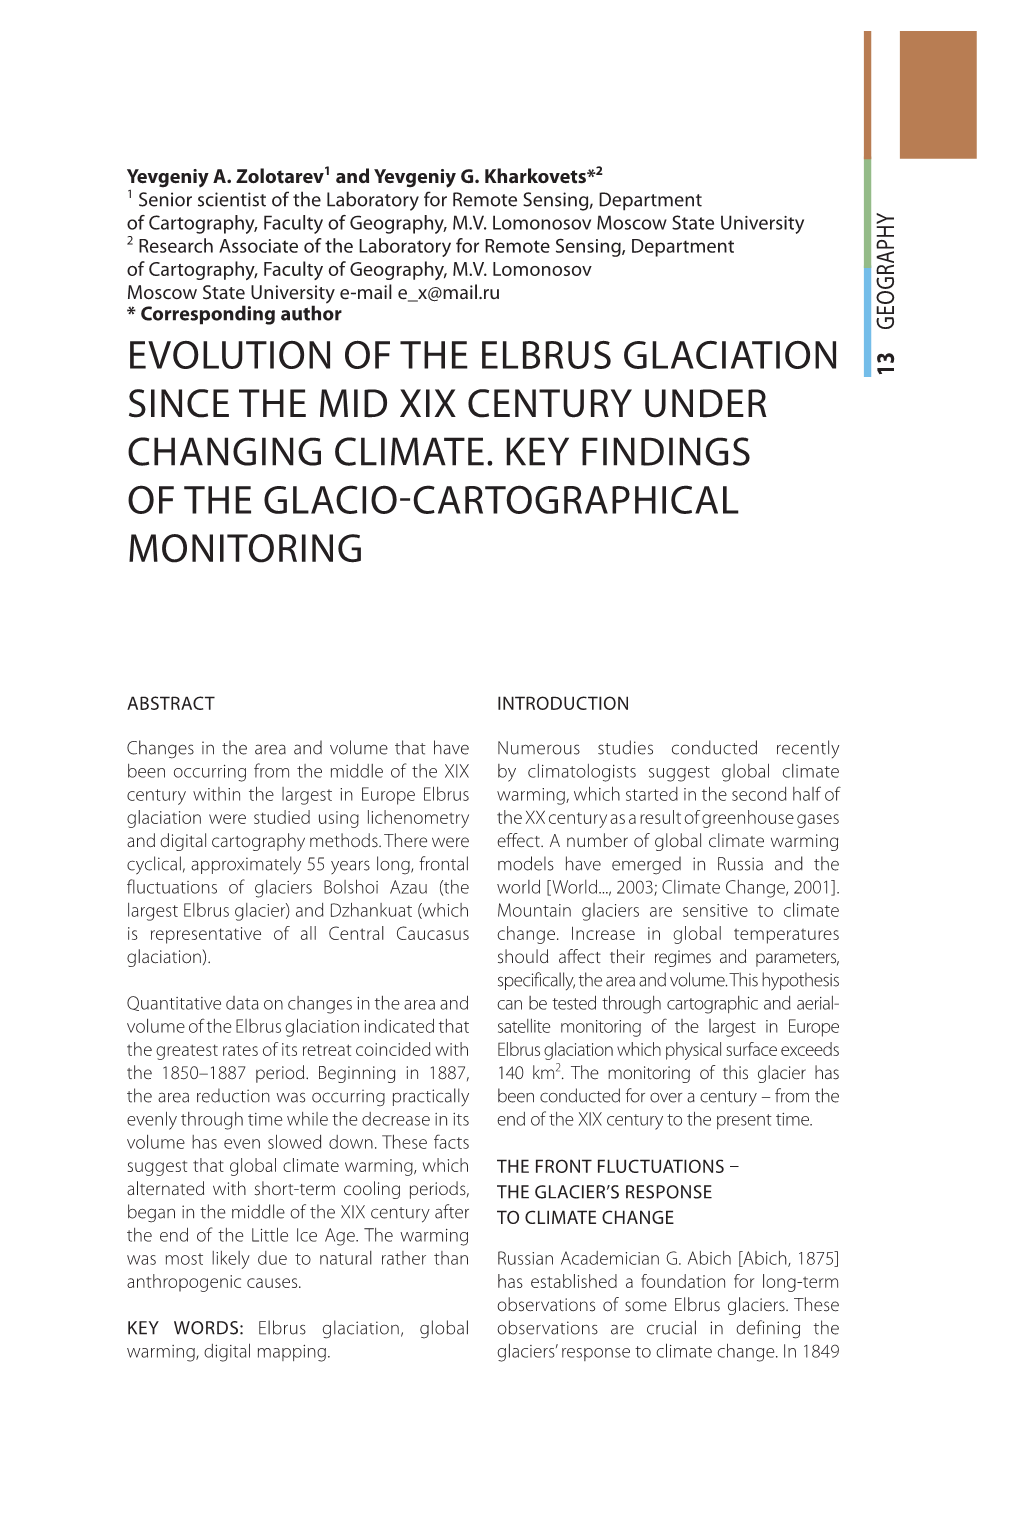 Evolution of the Elbrus Glaciation Since the Mid Xix